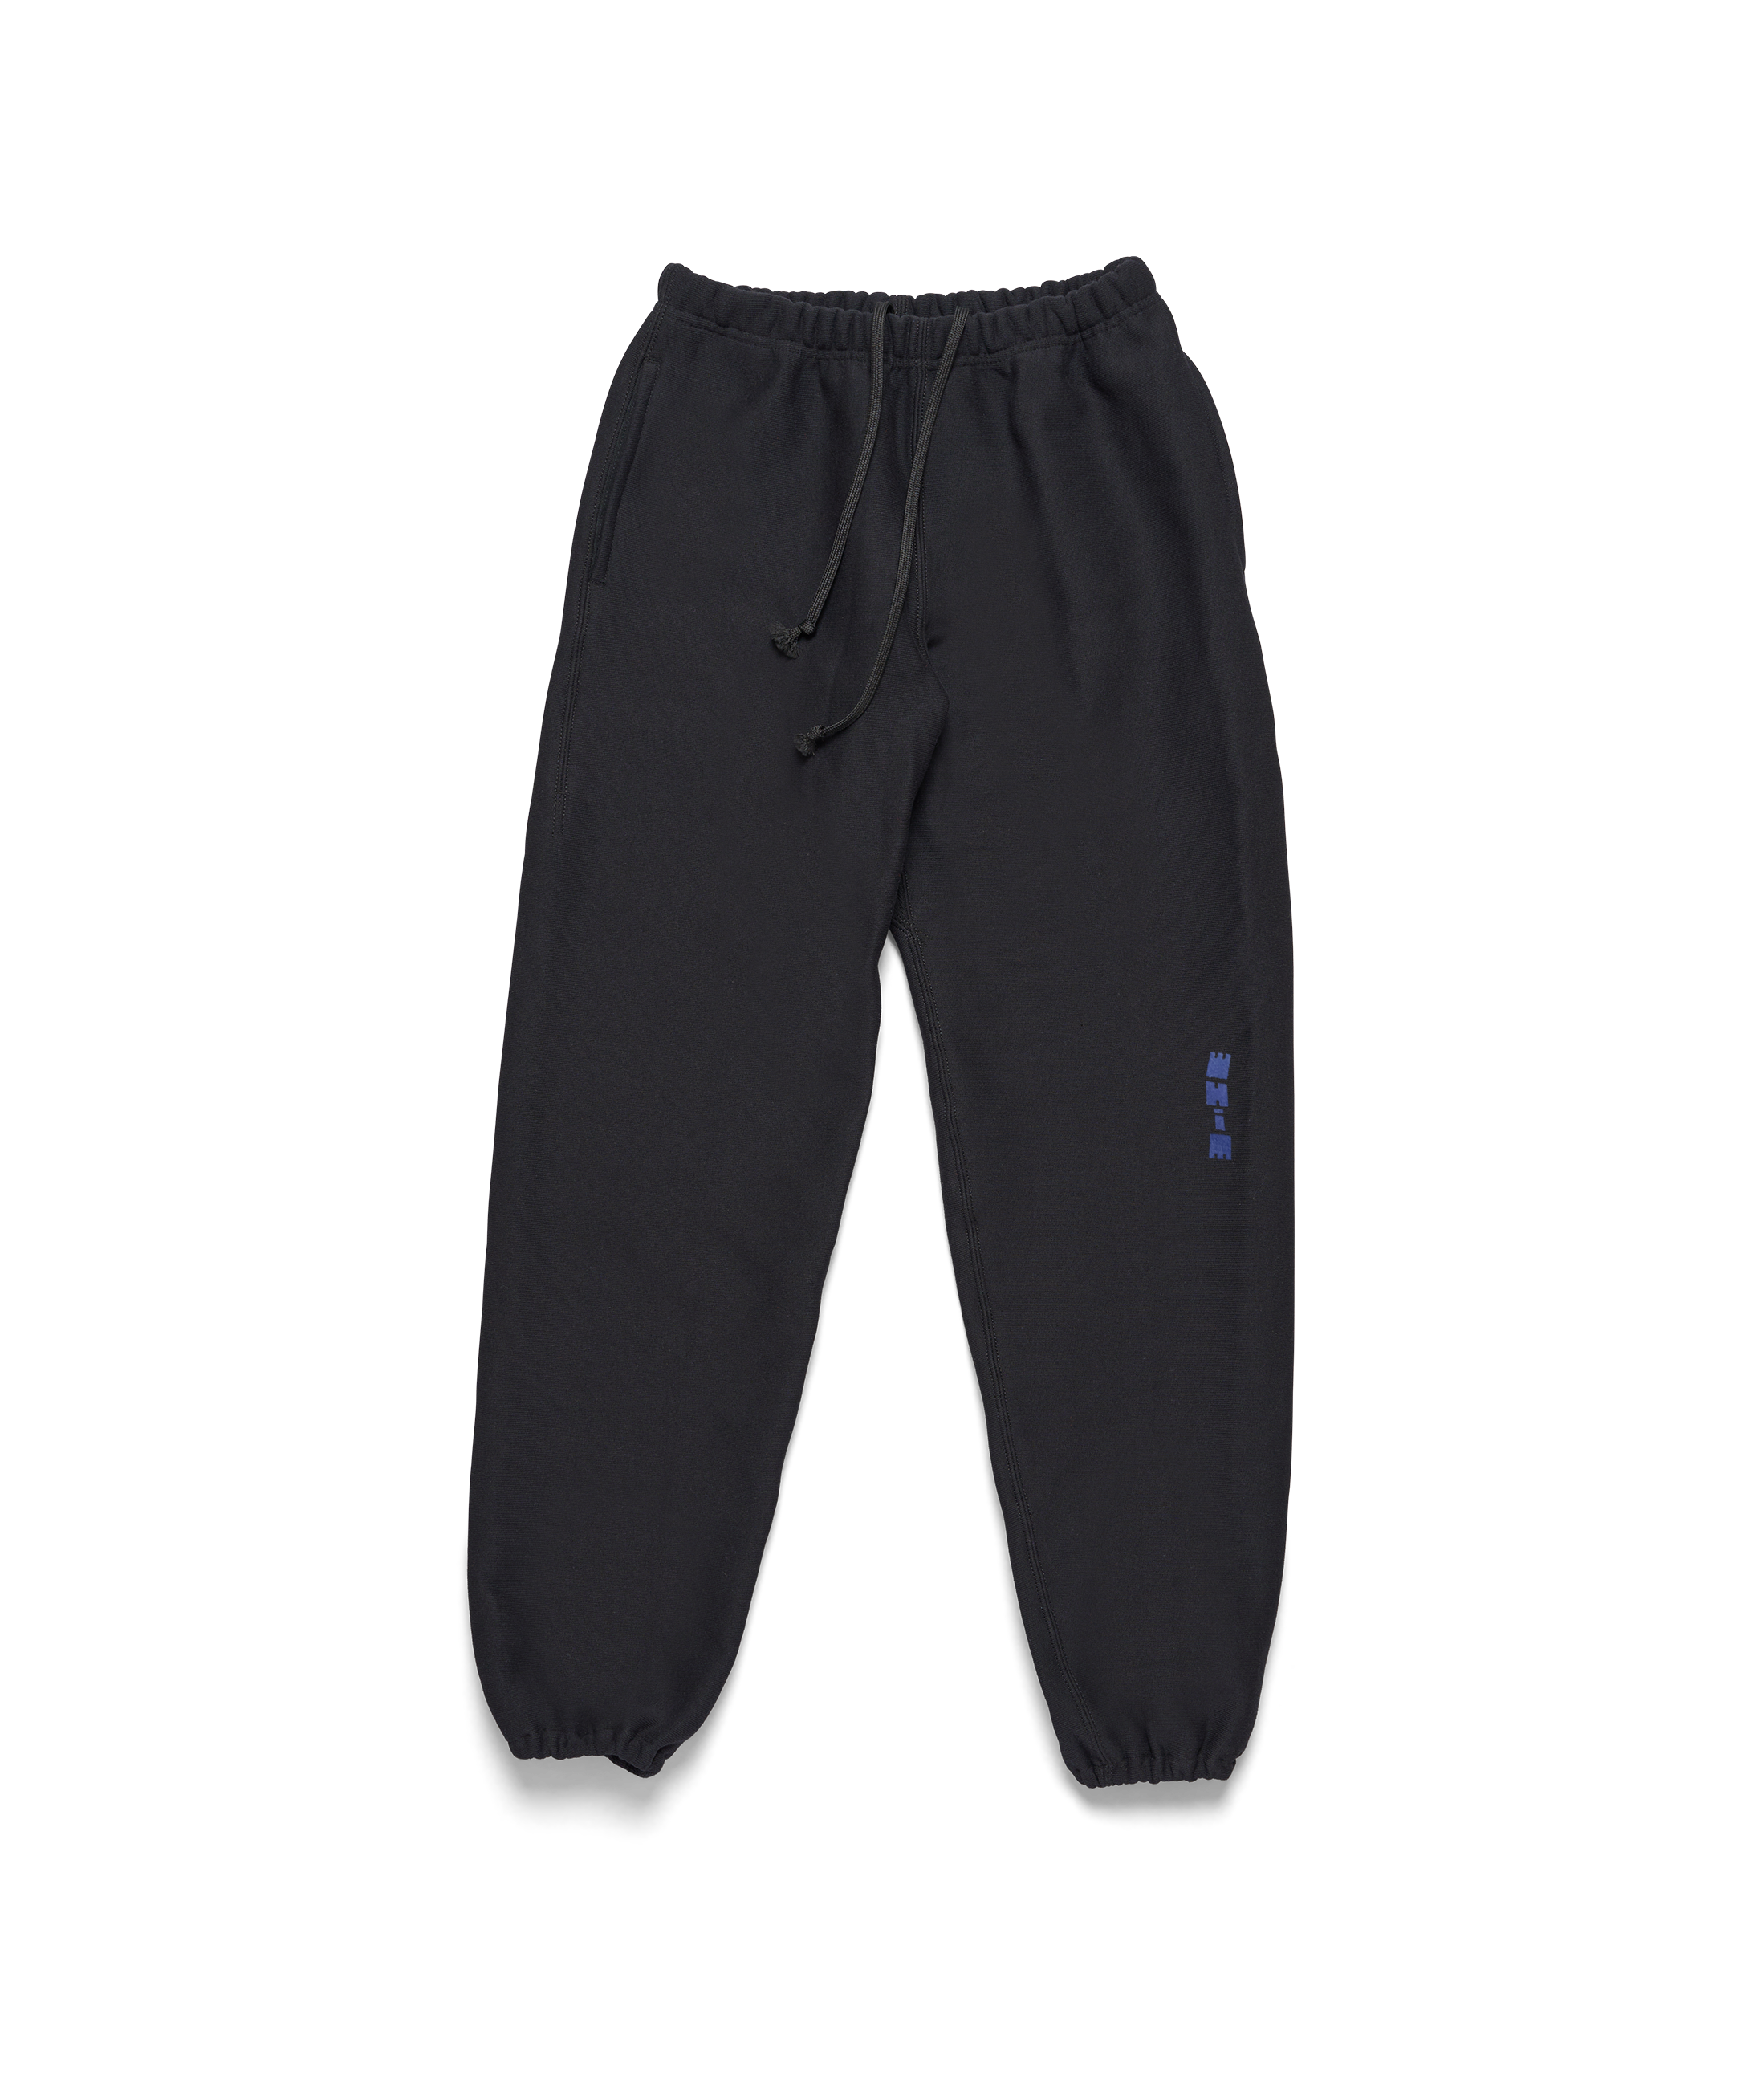 Embroidered Black Cross-Knit Heavyweight Camber Sweatpants